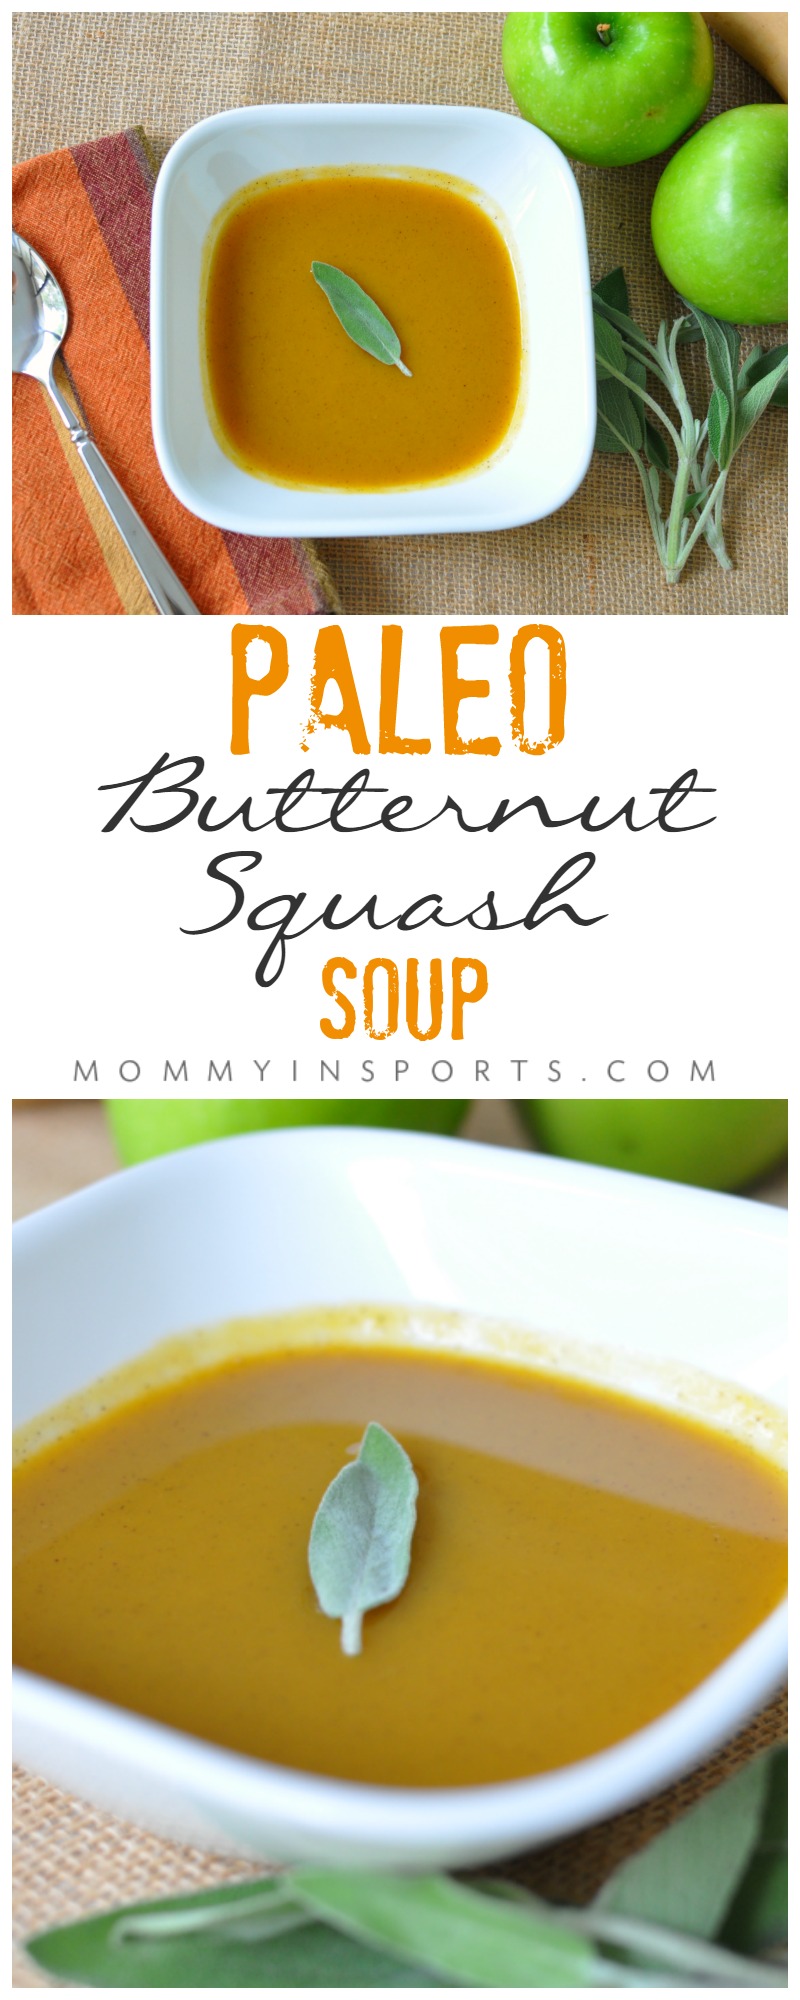 Looking for a dairy-free & paleo butternut squash soup that silky, creamy, and naturally sweet? You won't be disappointed in this perfect paleo butternut squash soup recipe!